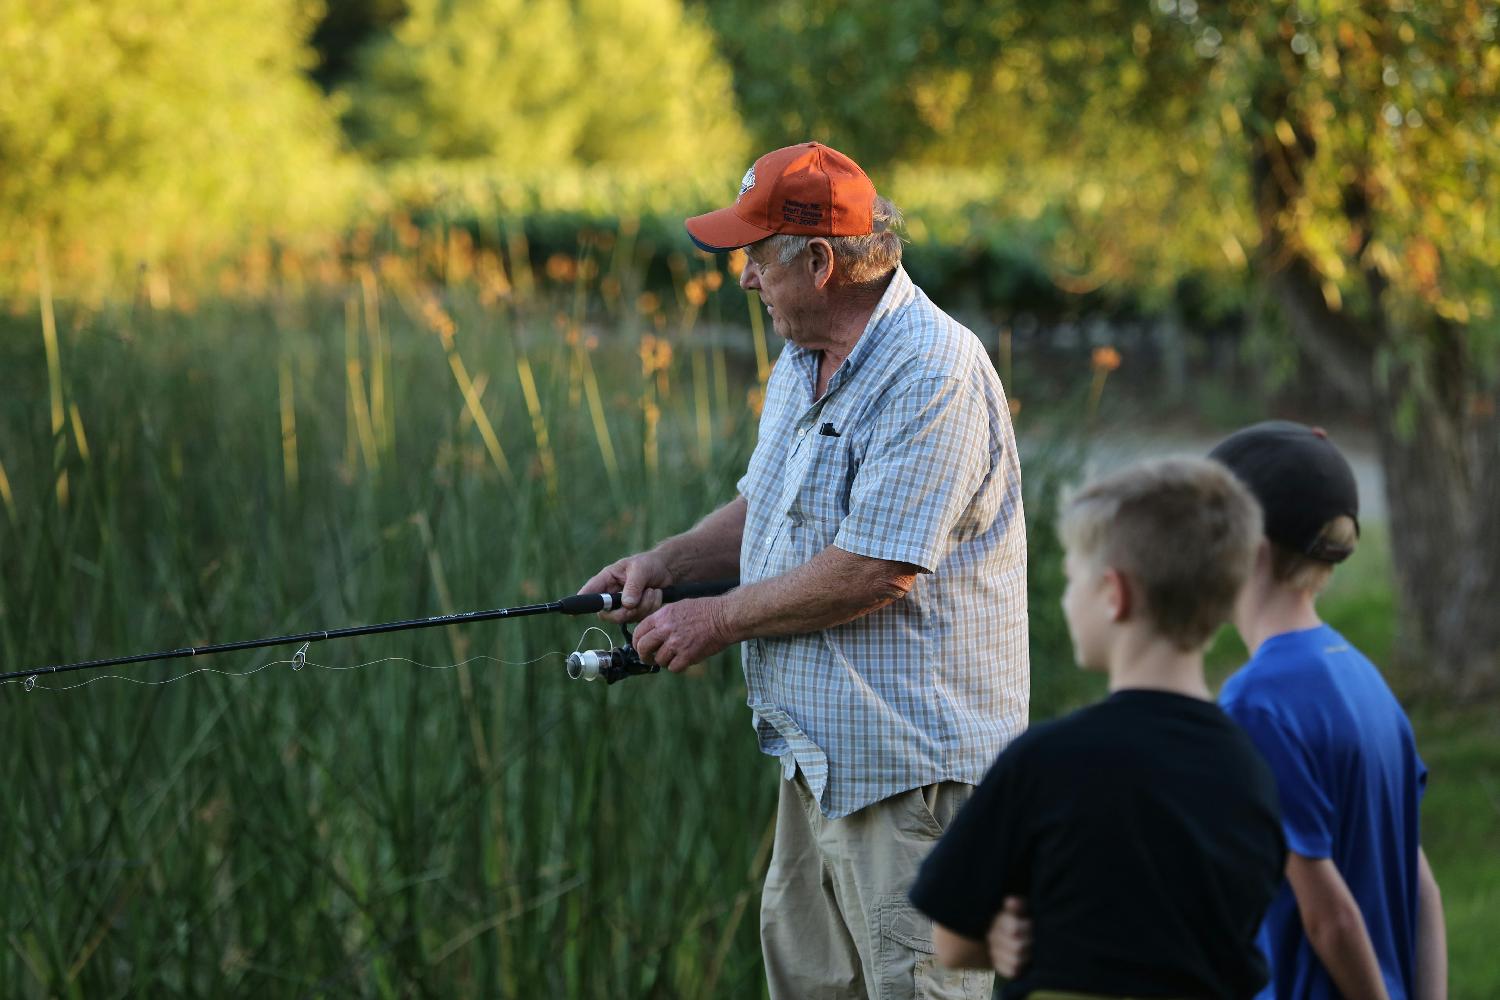 One of our long time tasting room employees at our Cakebread Cellars Family Picnic teaching younger generations to fish.